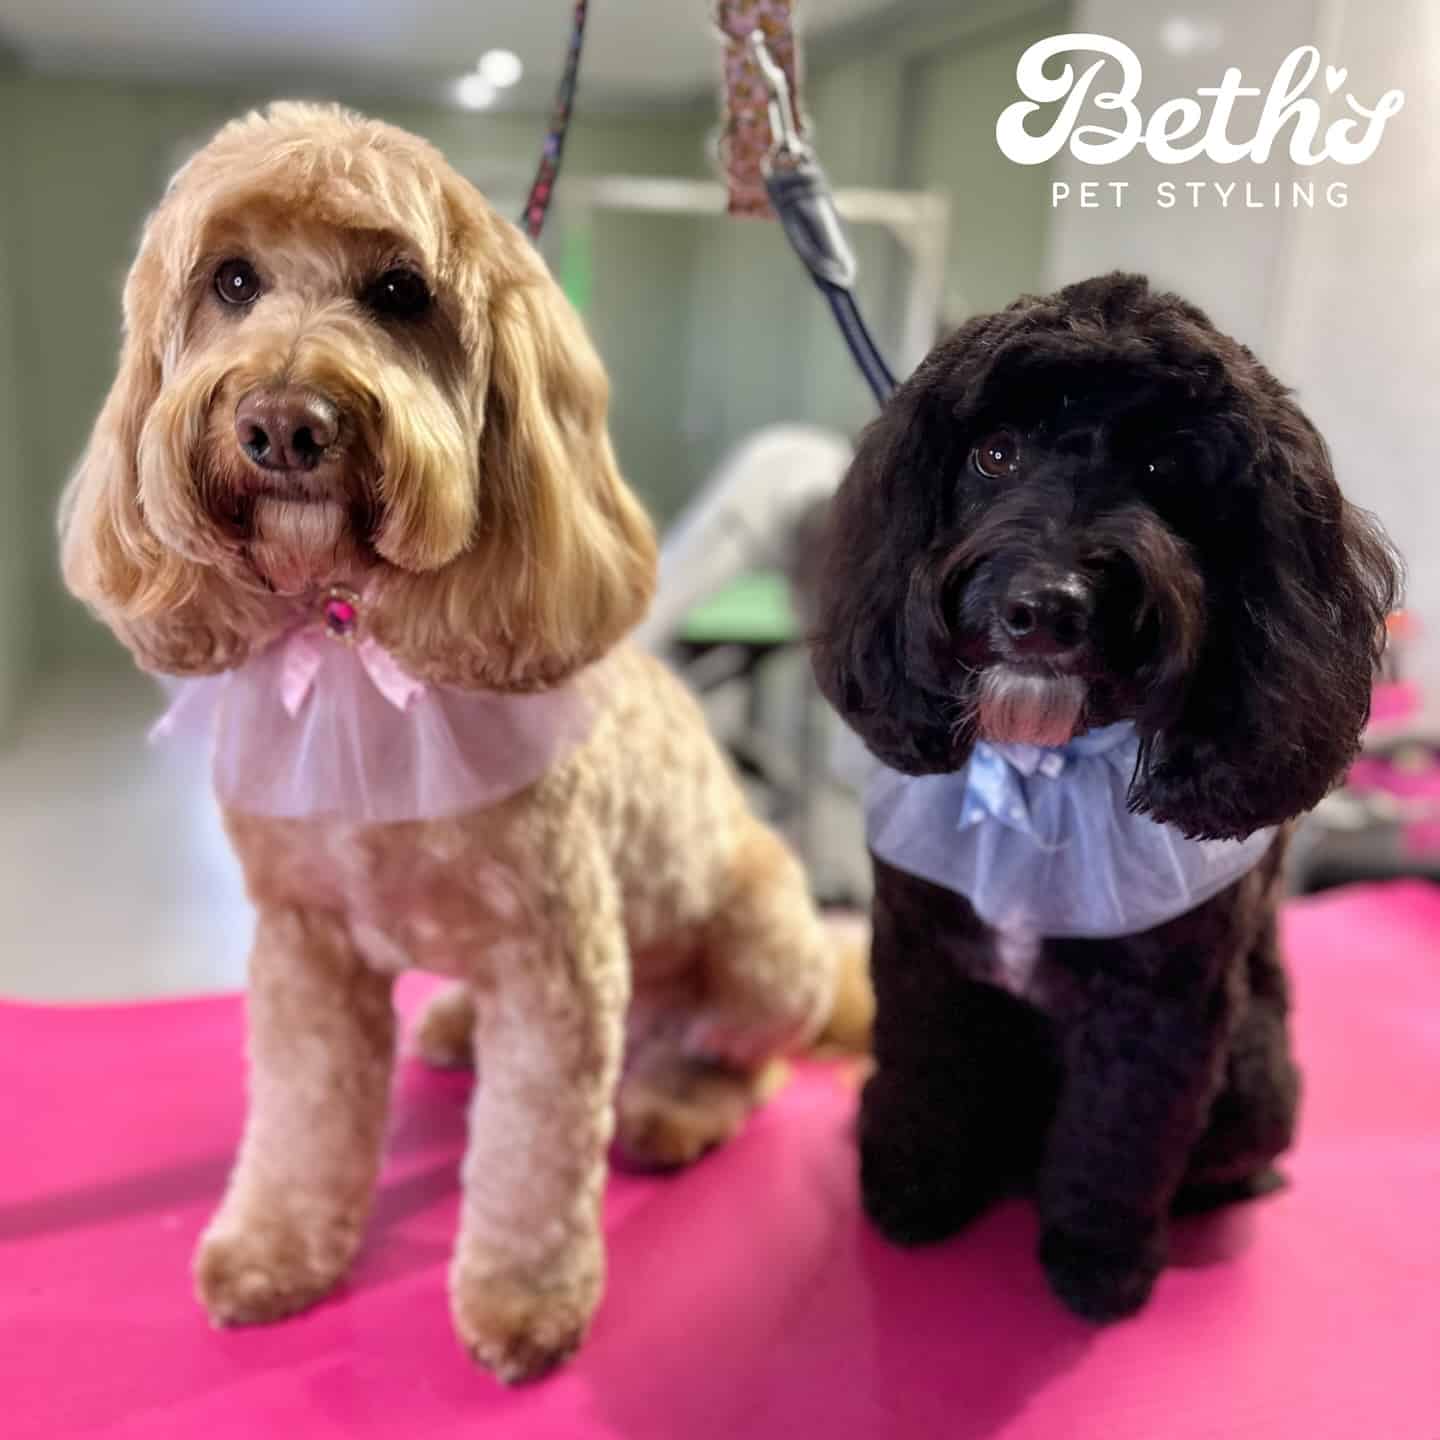 Beth’s Pet Styling - Happy Safe and Low Stress Dog Grooming